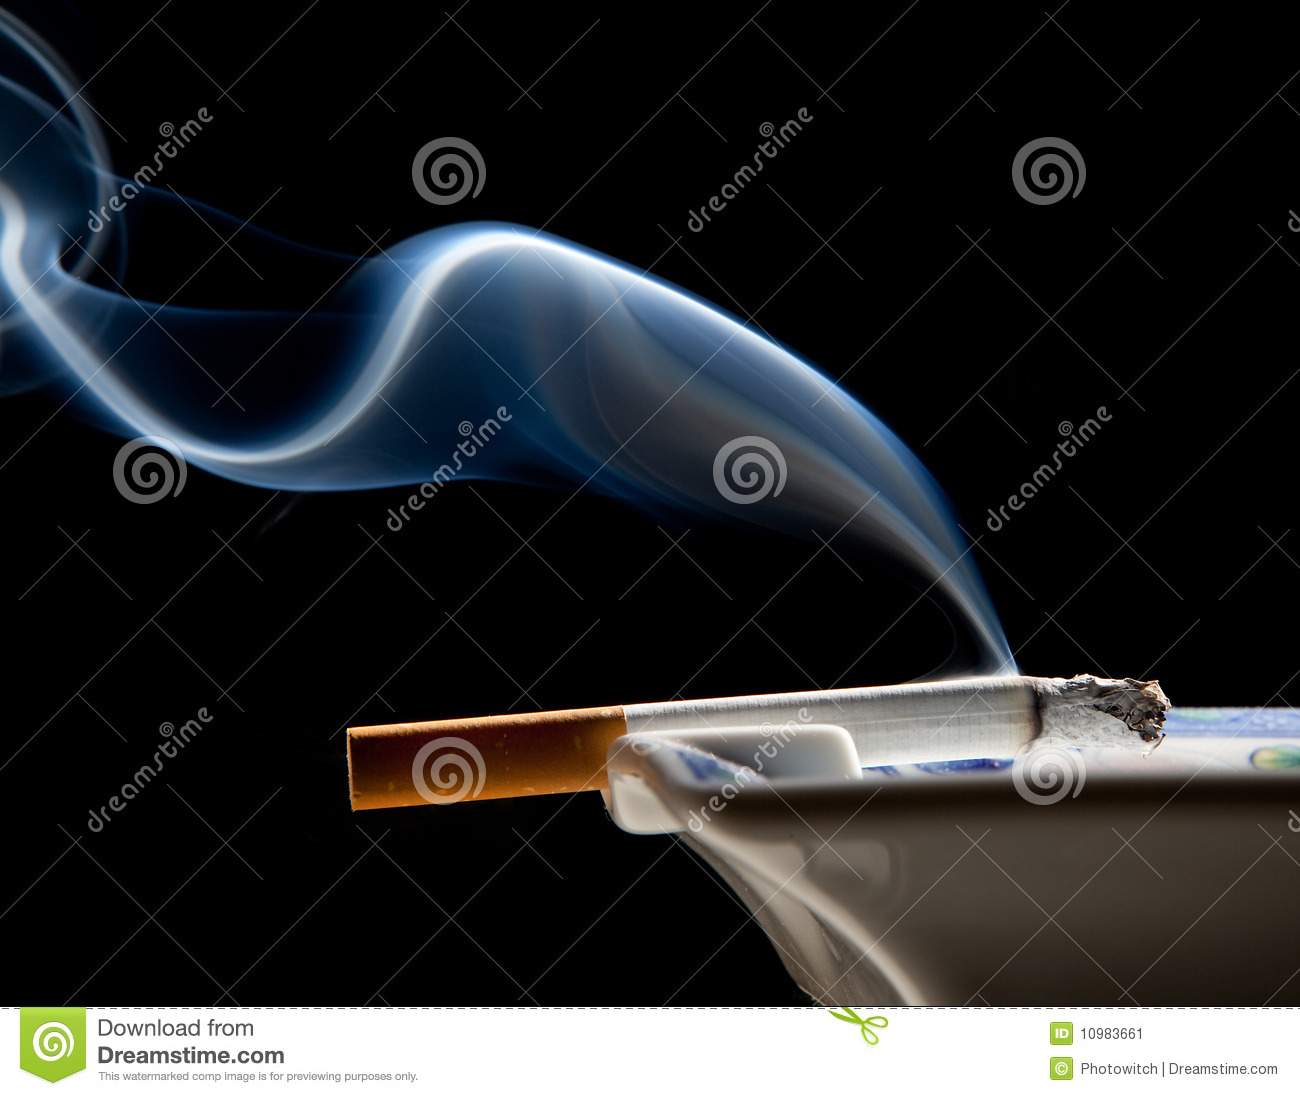 Cigarette On Ashtray With A Beautiful Wisp Of Smoke